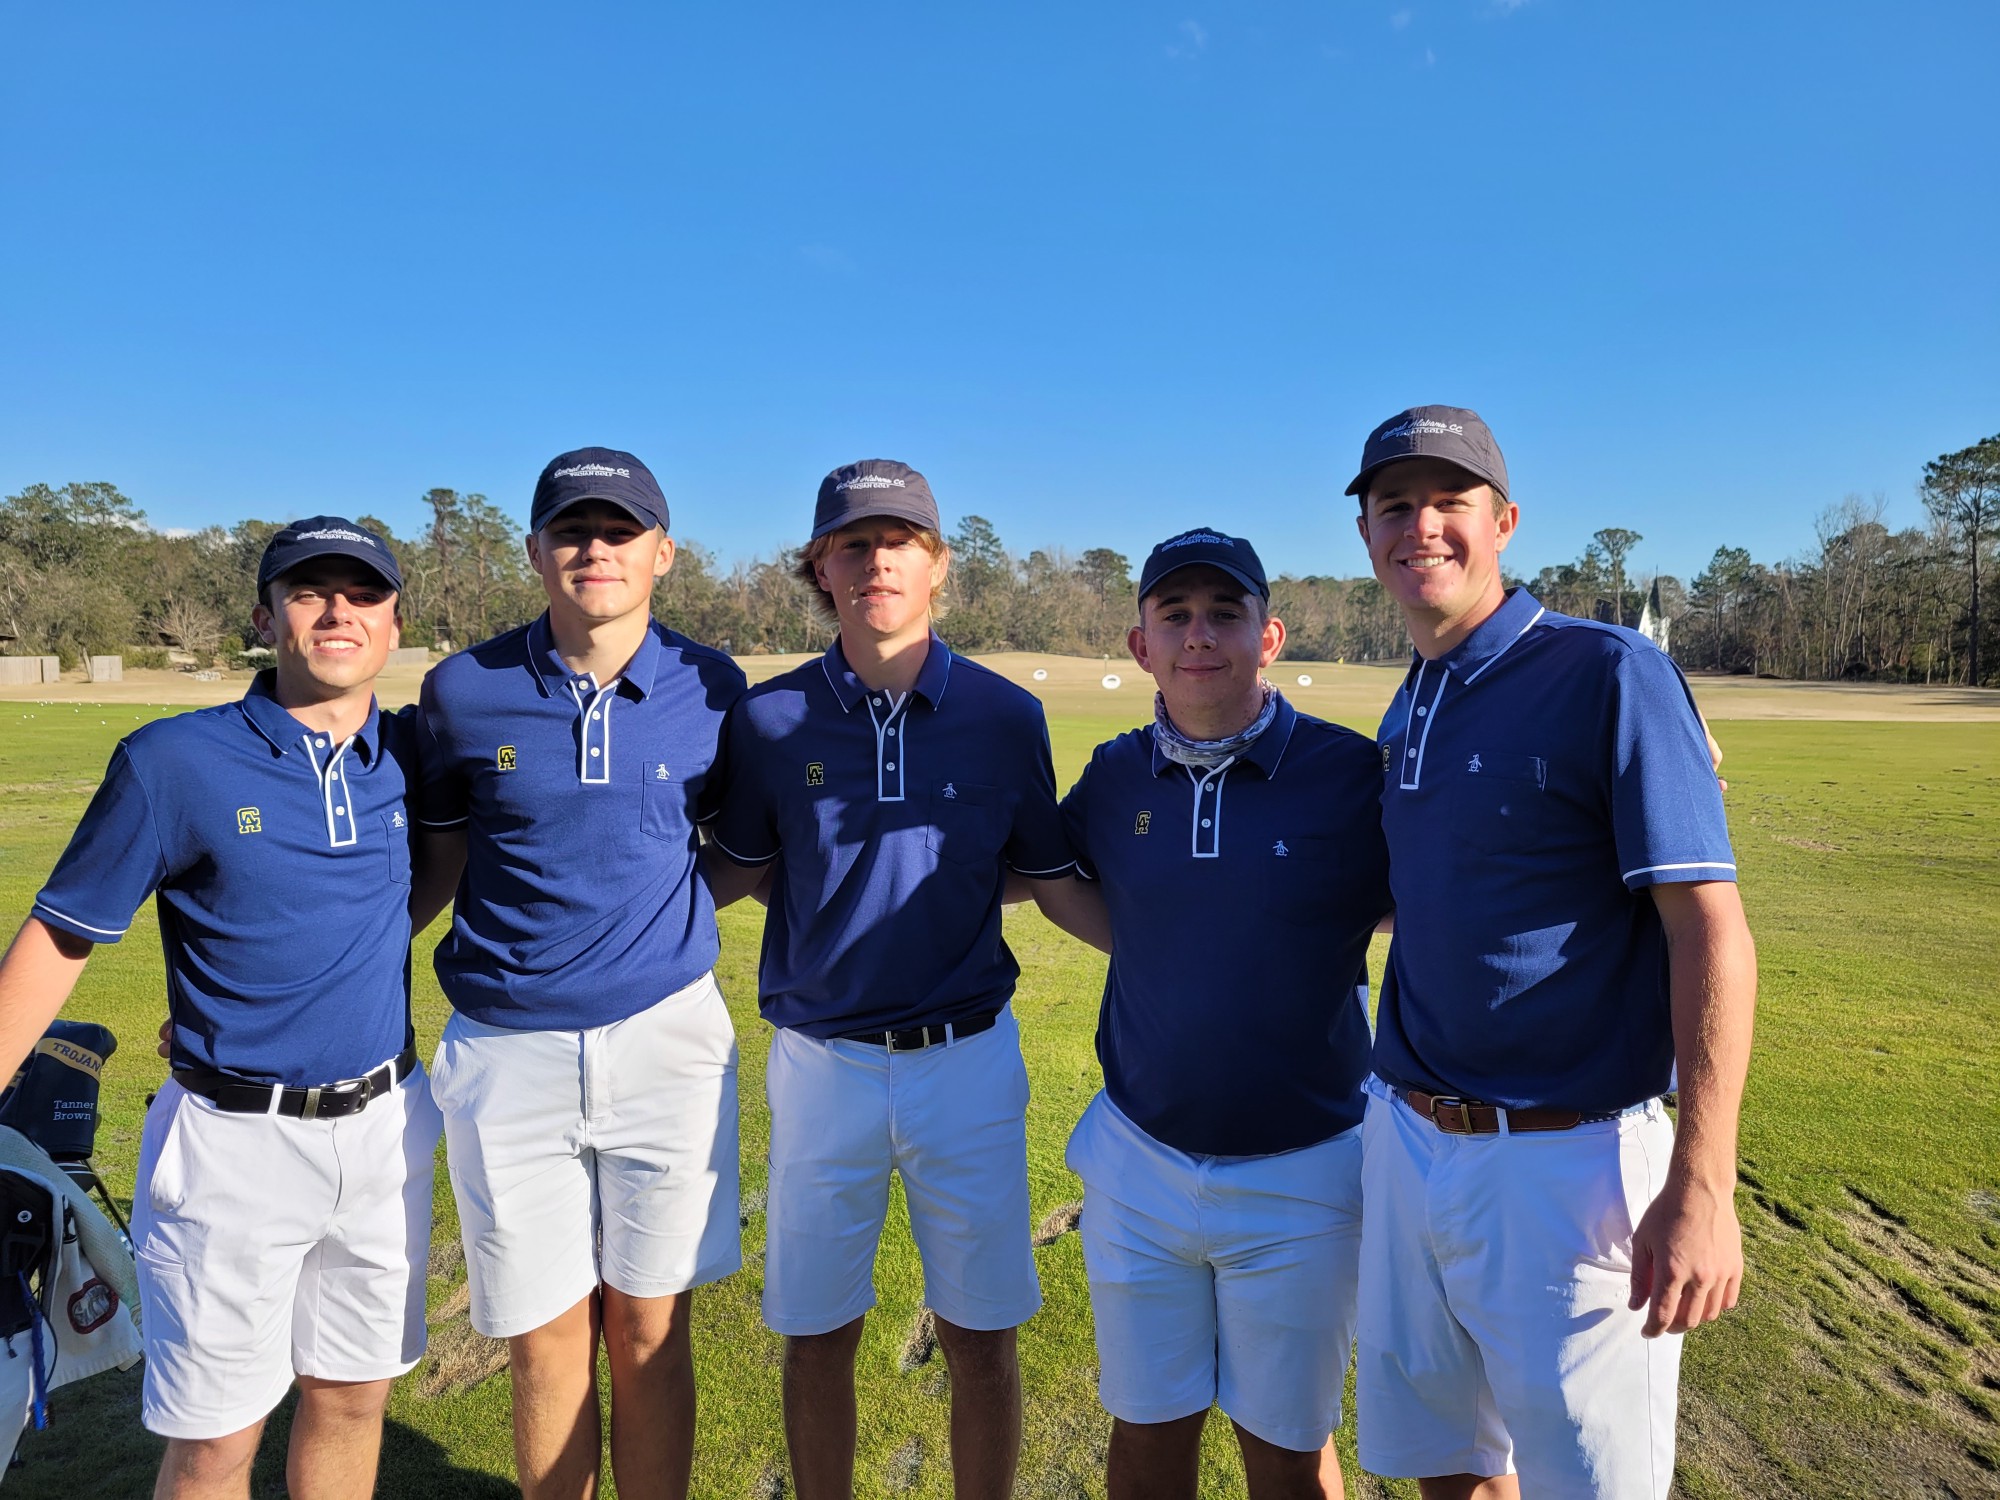 CACC Golf picks up a win in Fairhope Central Alabama Community College pic